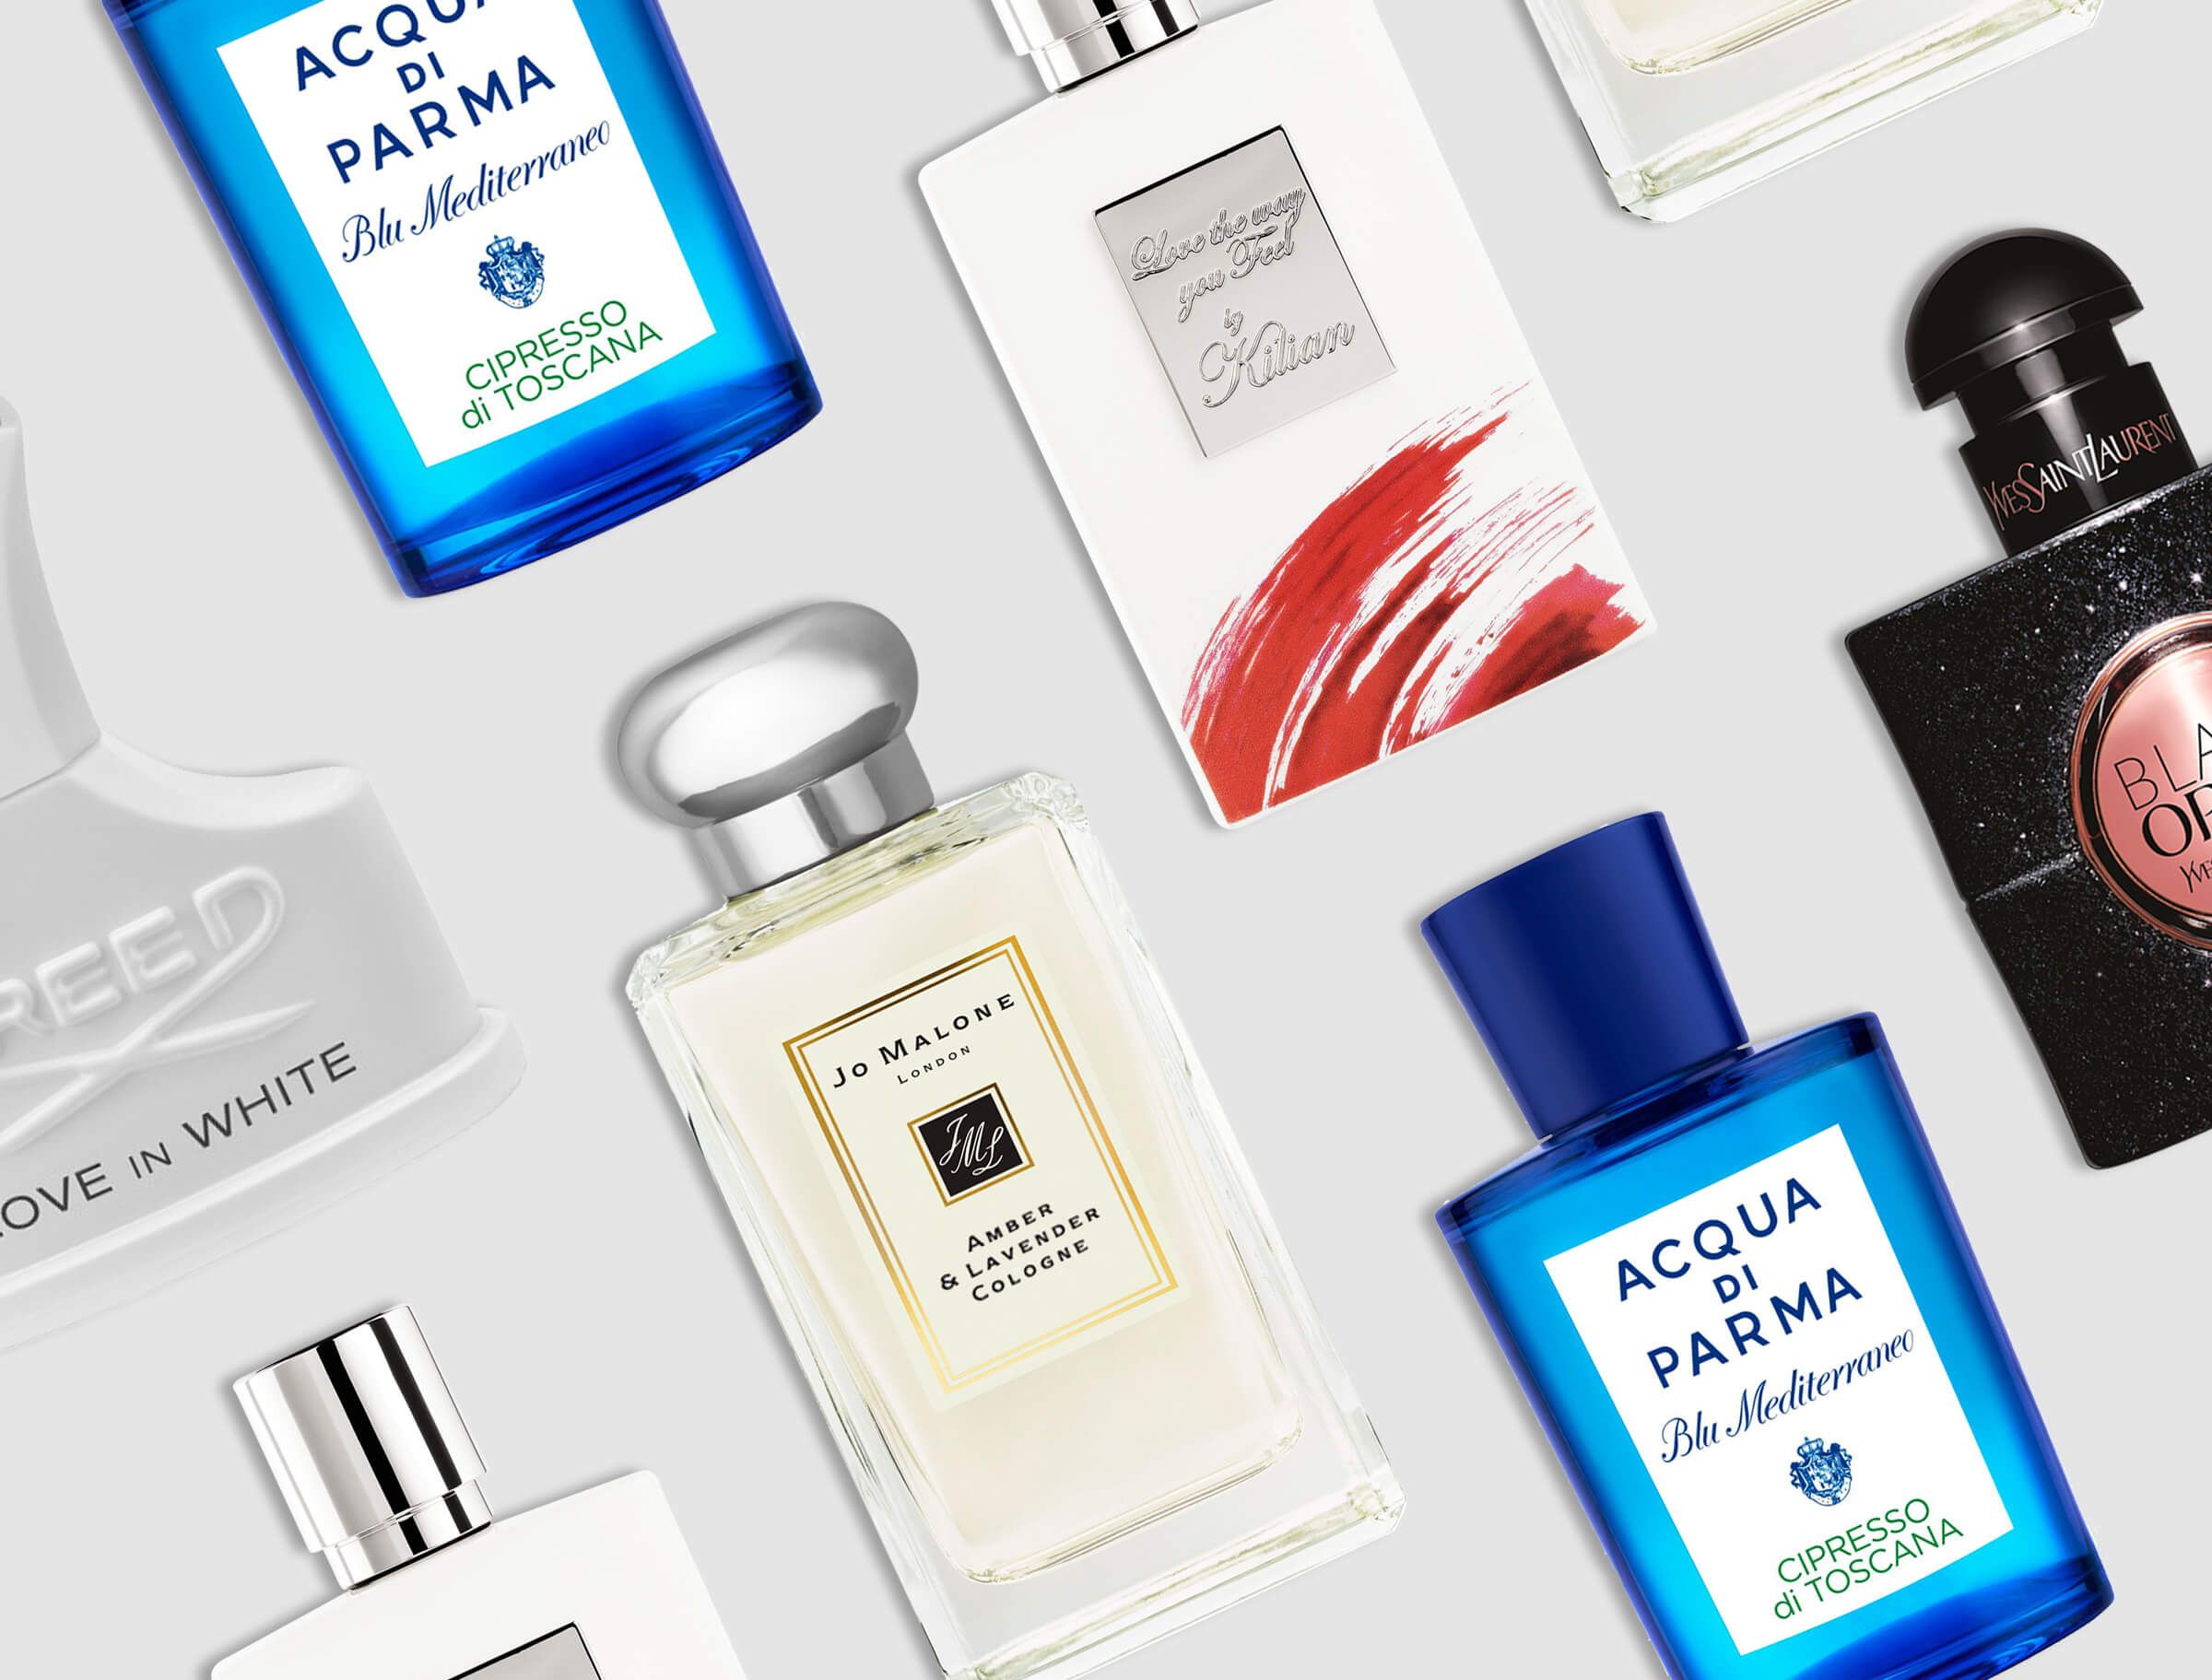 A master perfumer’s guide to finding your signature scent